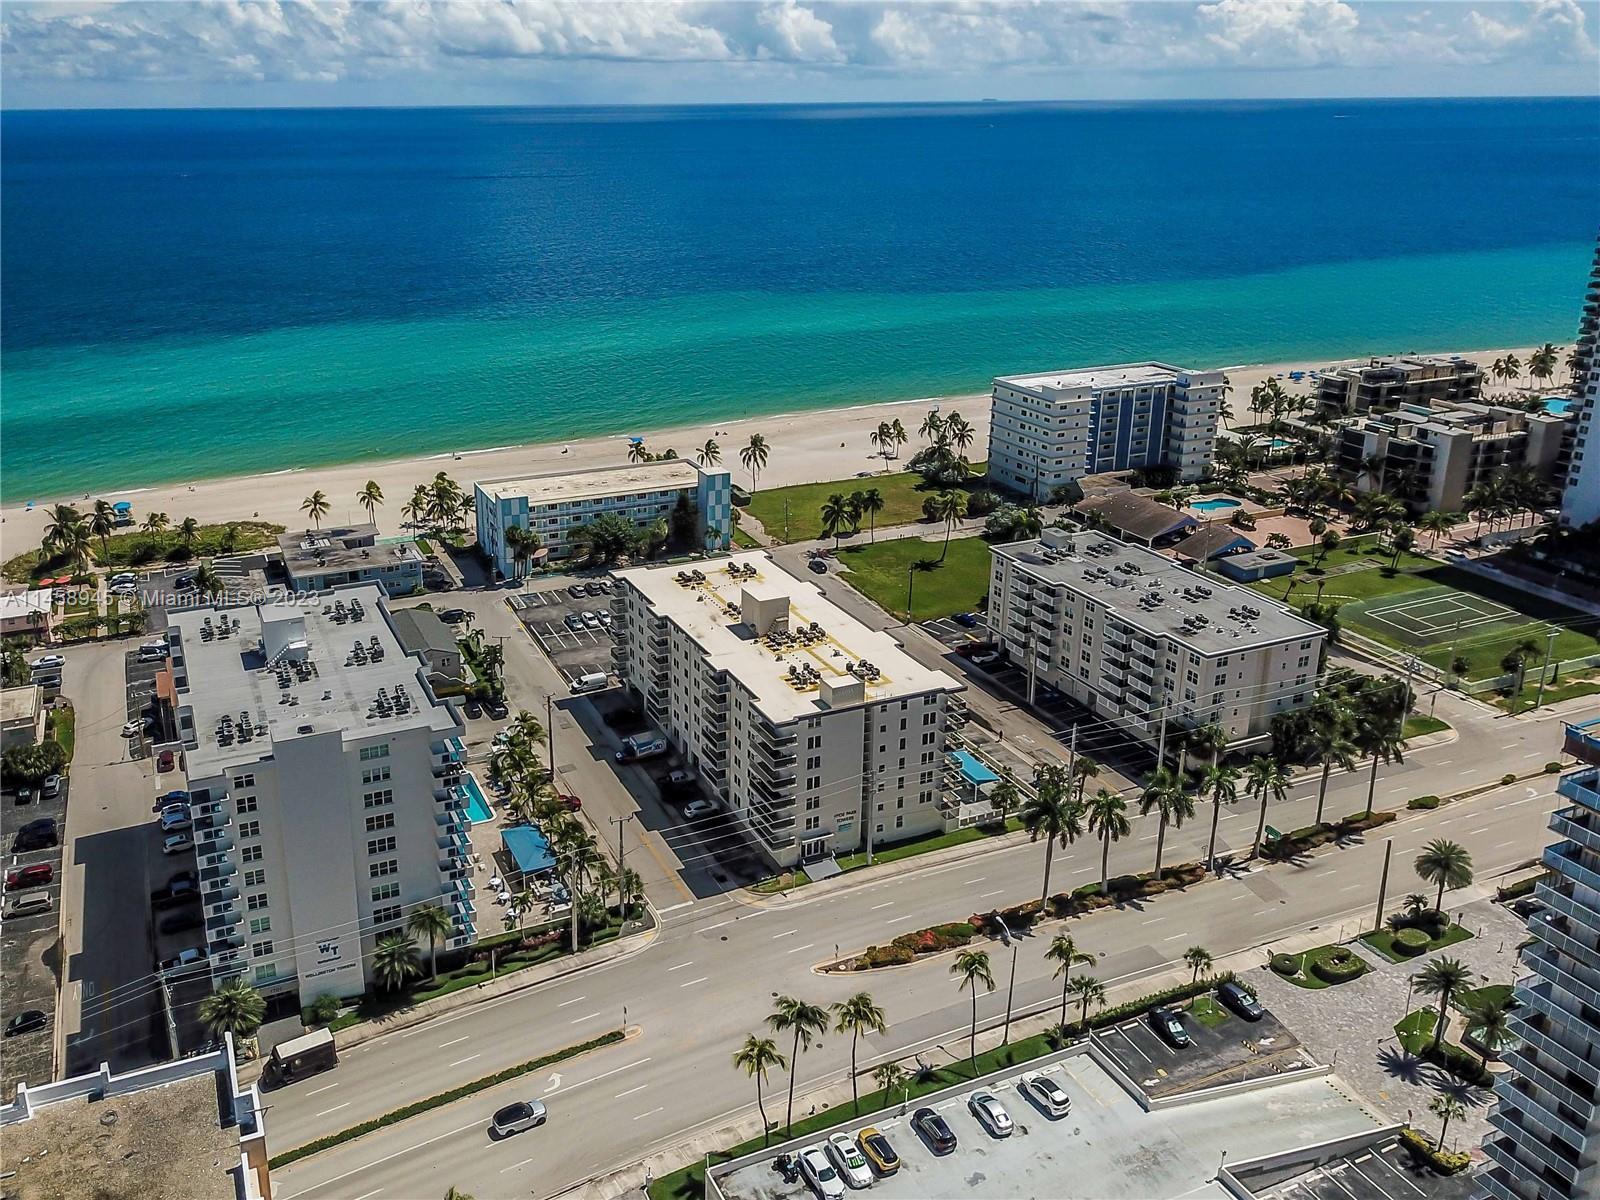 Enjoy ocean and pool views from this very spacious 2 bedroom/2 bath unit.  High impact doors and win